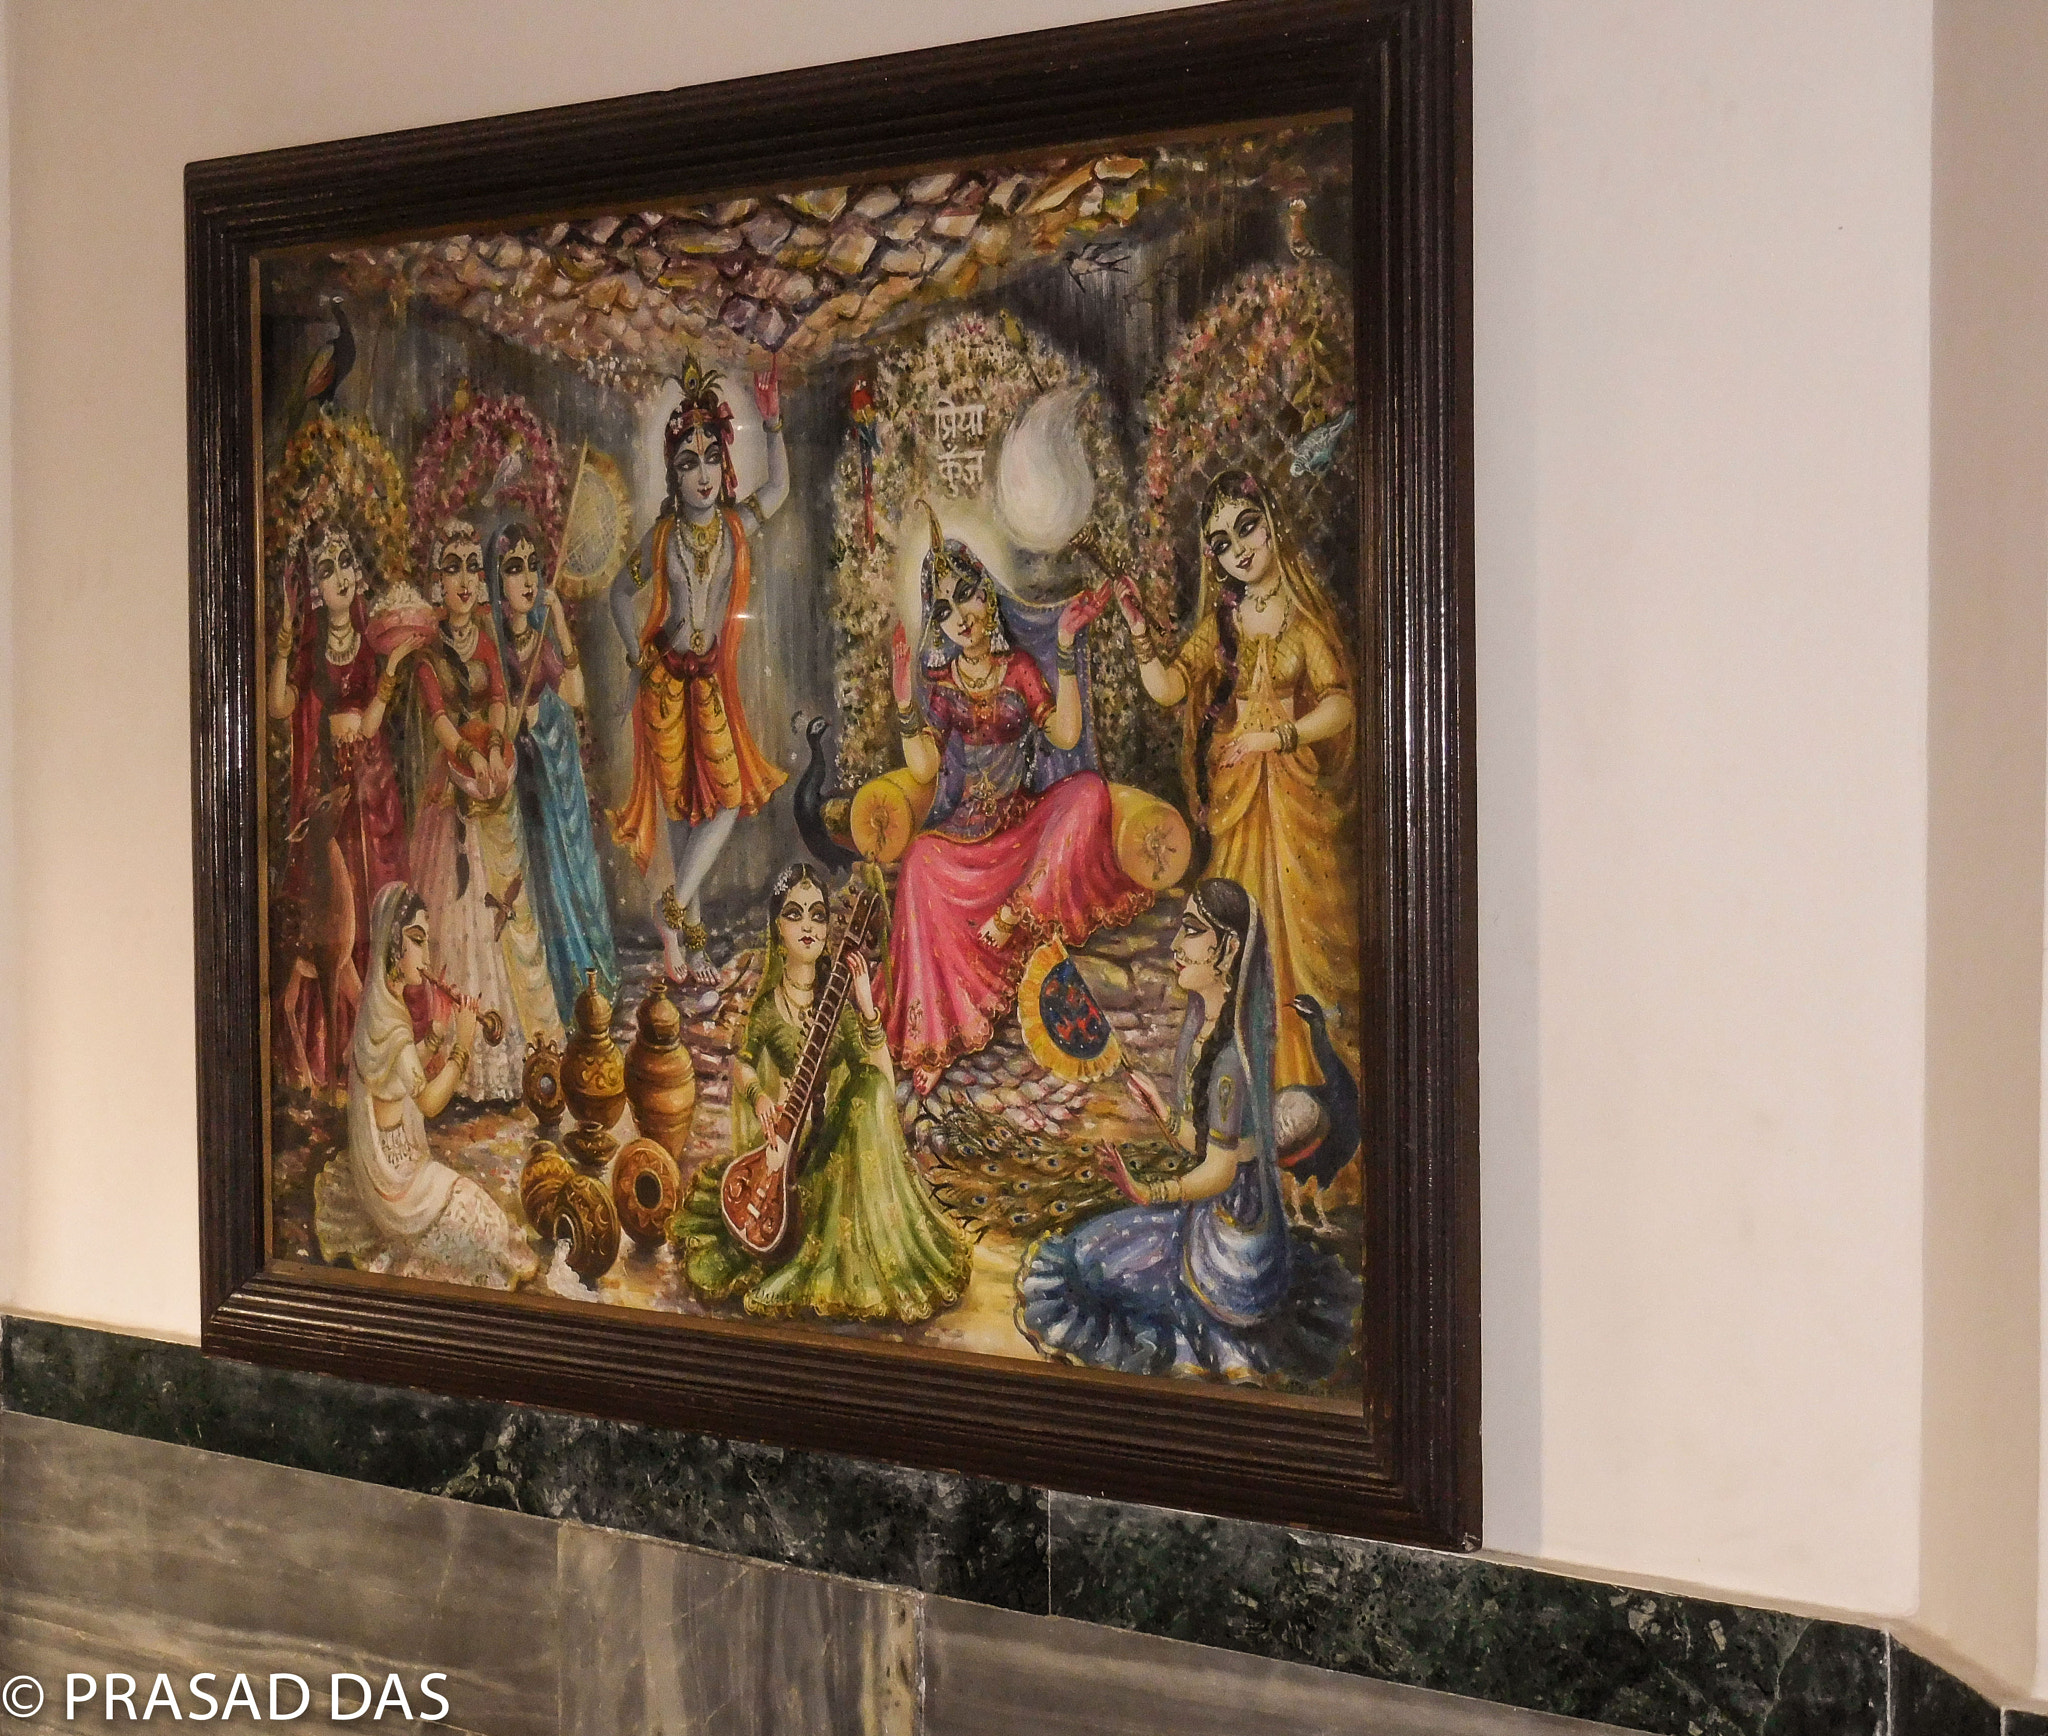 Nikon Coolpix S6900 sample photo. In iskcon new delhi many ancient paintings were displayed (of ) photography